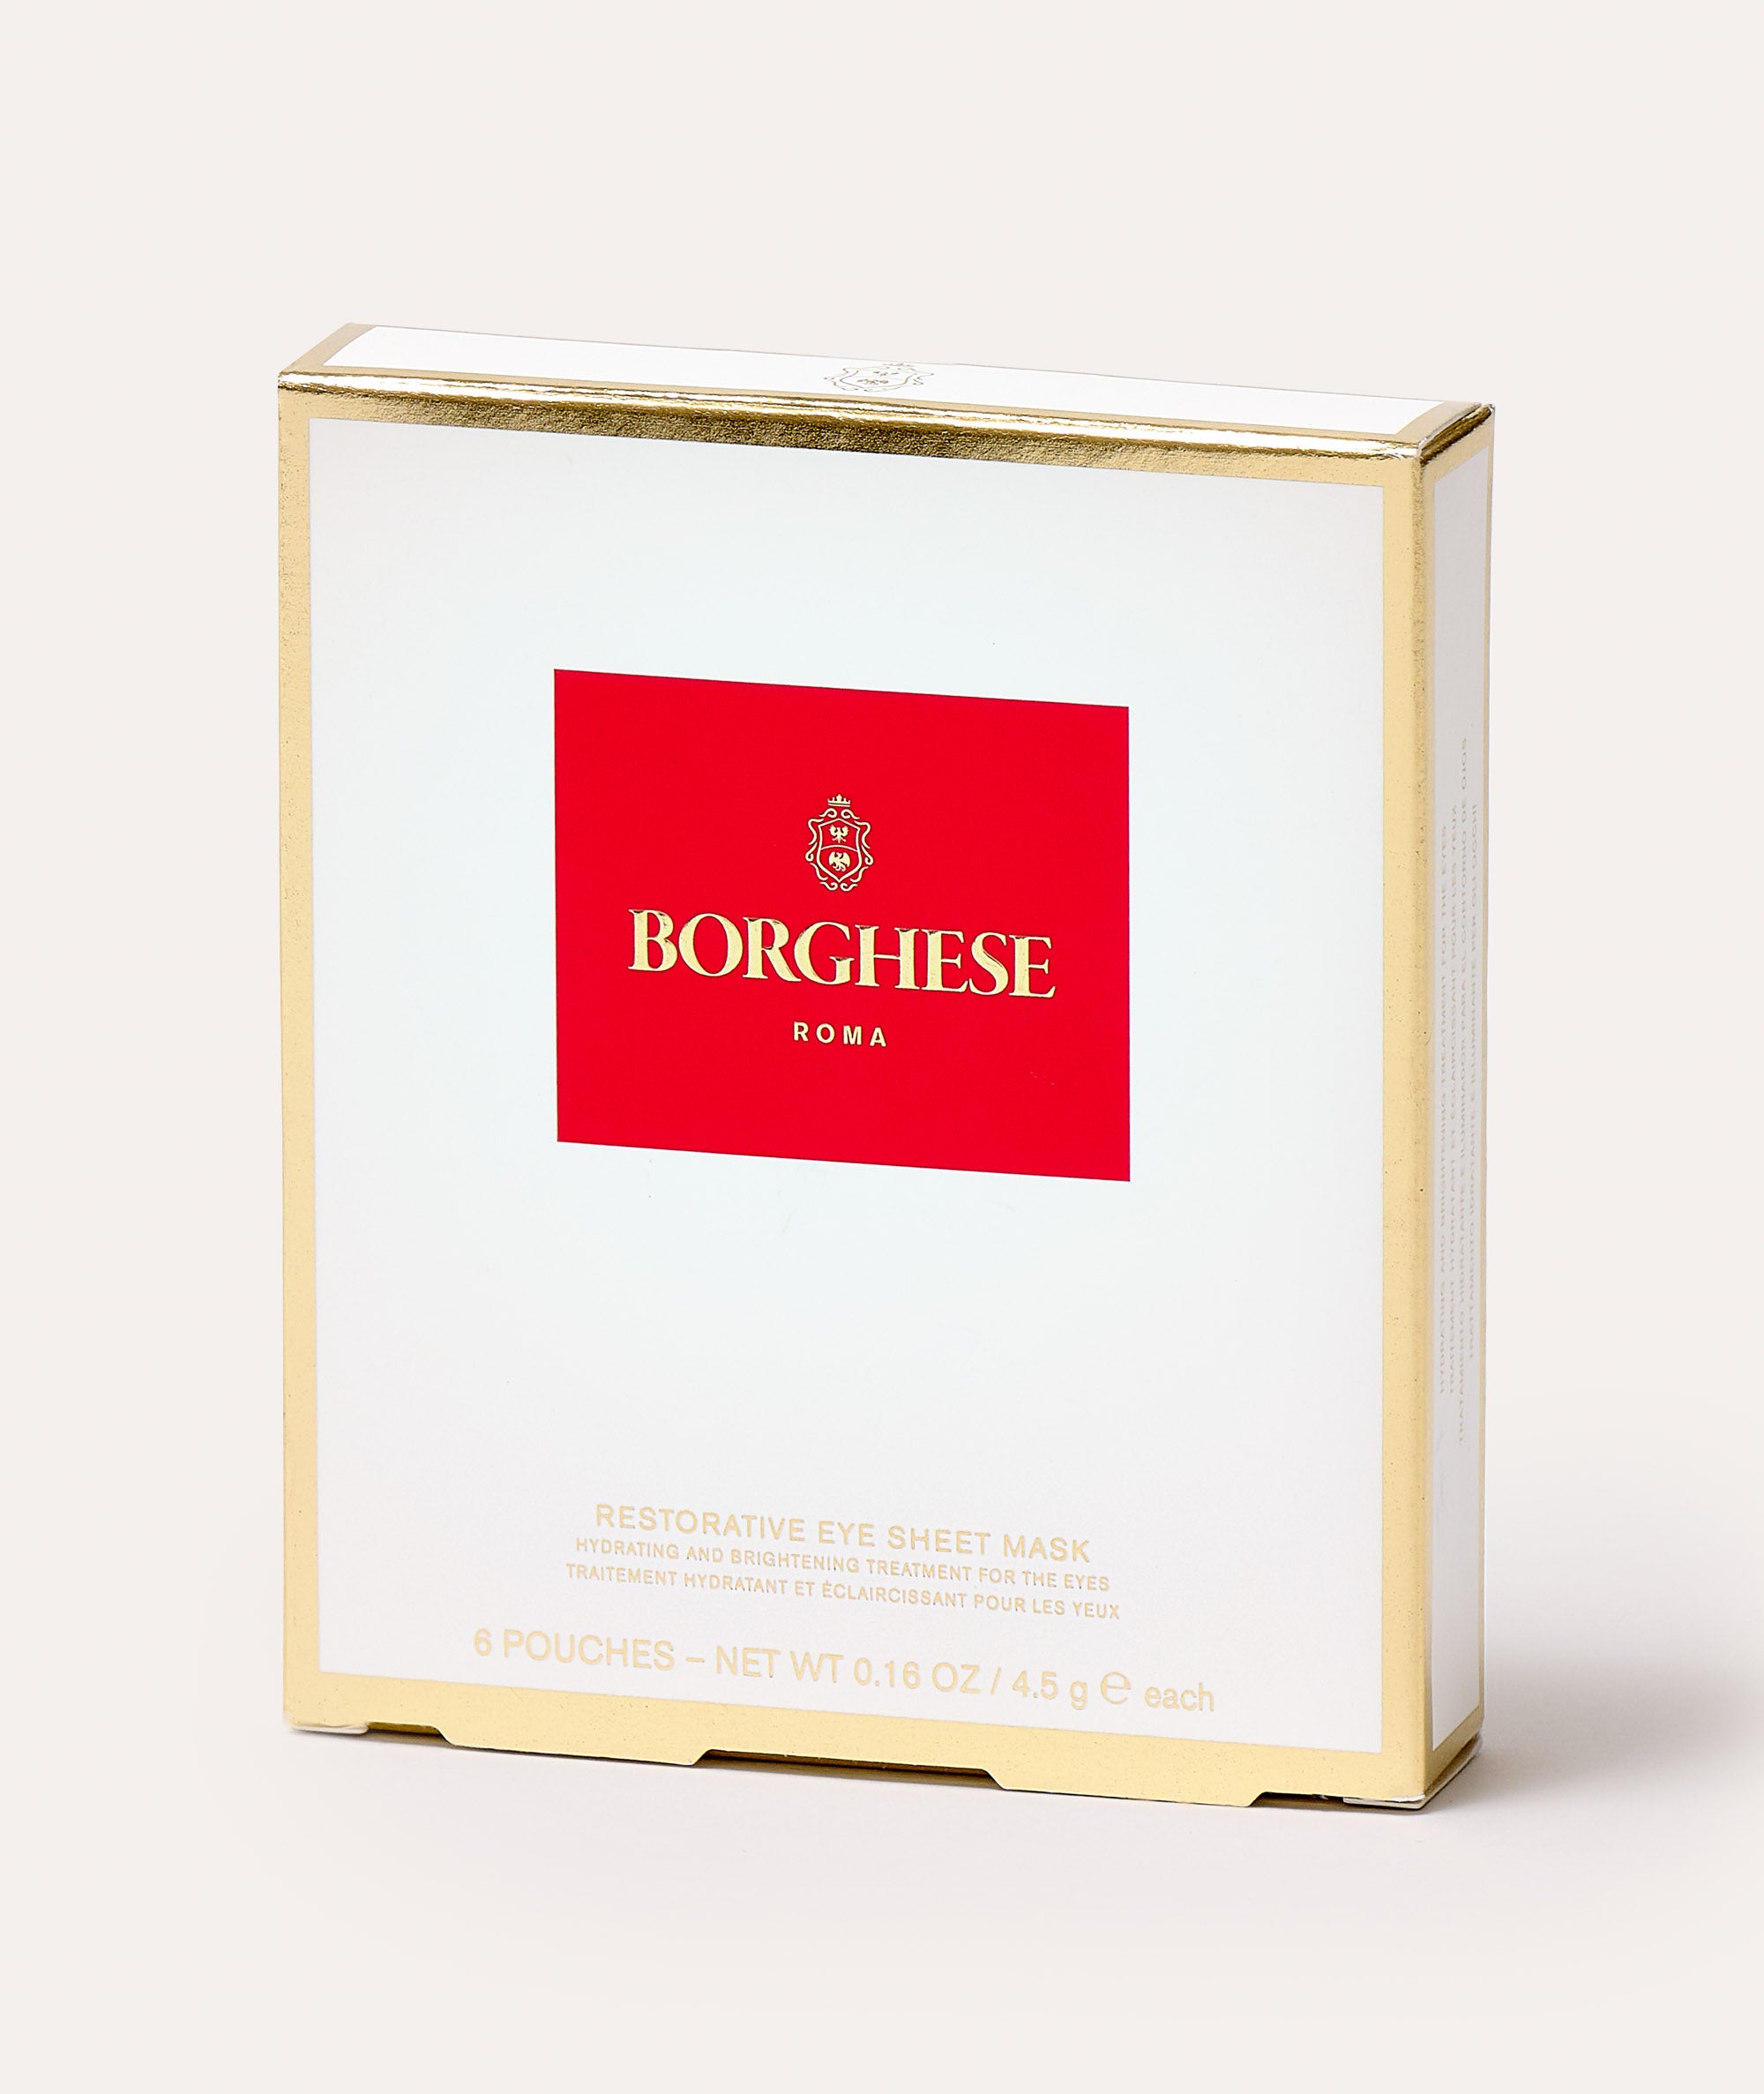 This is a picture of the Borghese Restorative Eye Sheet Masks box